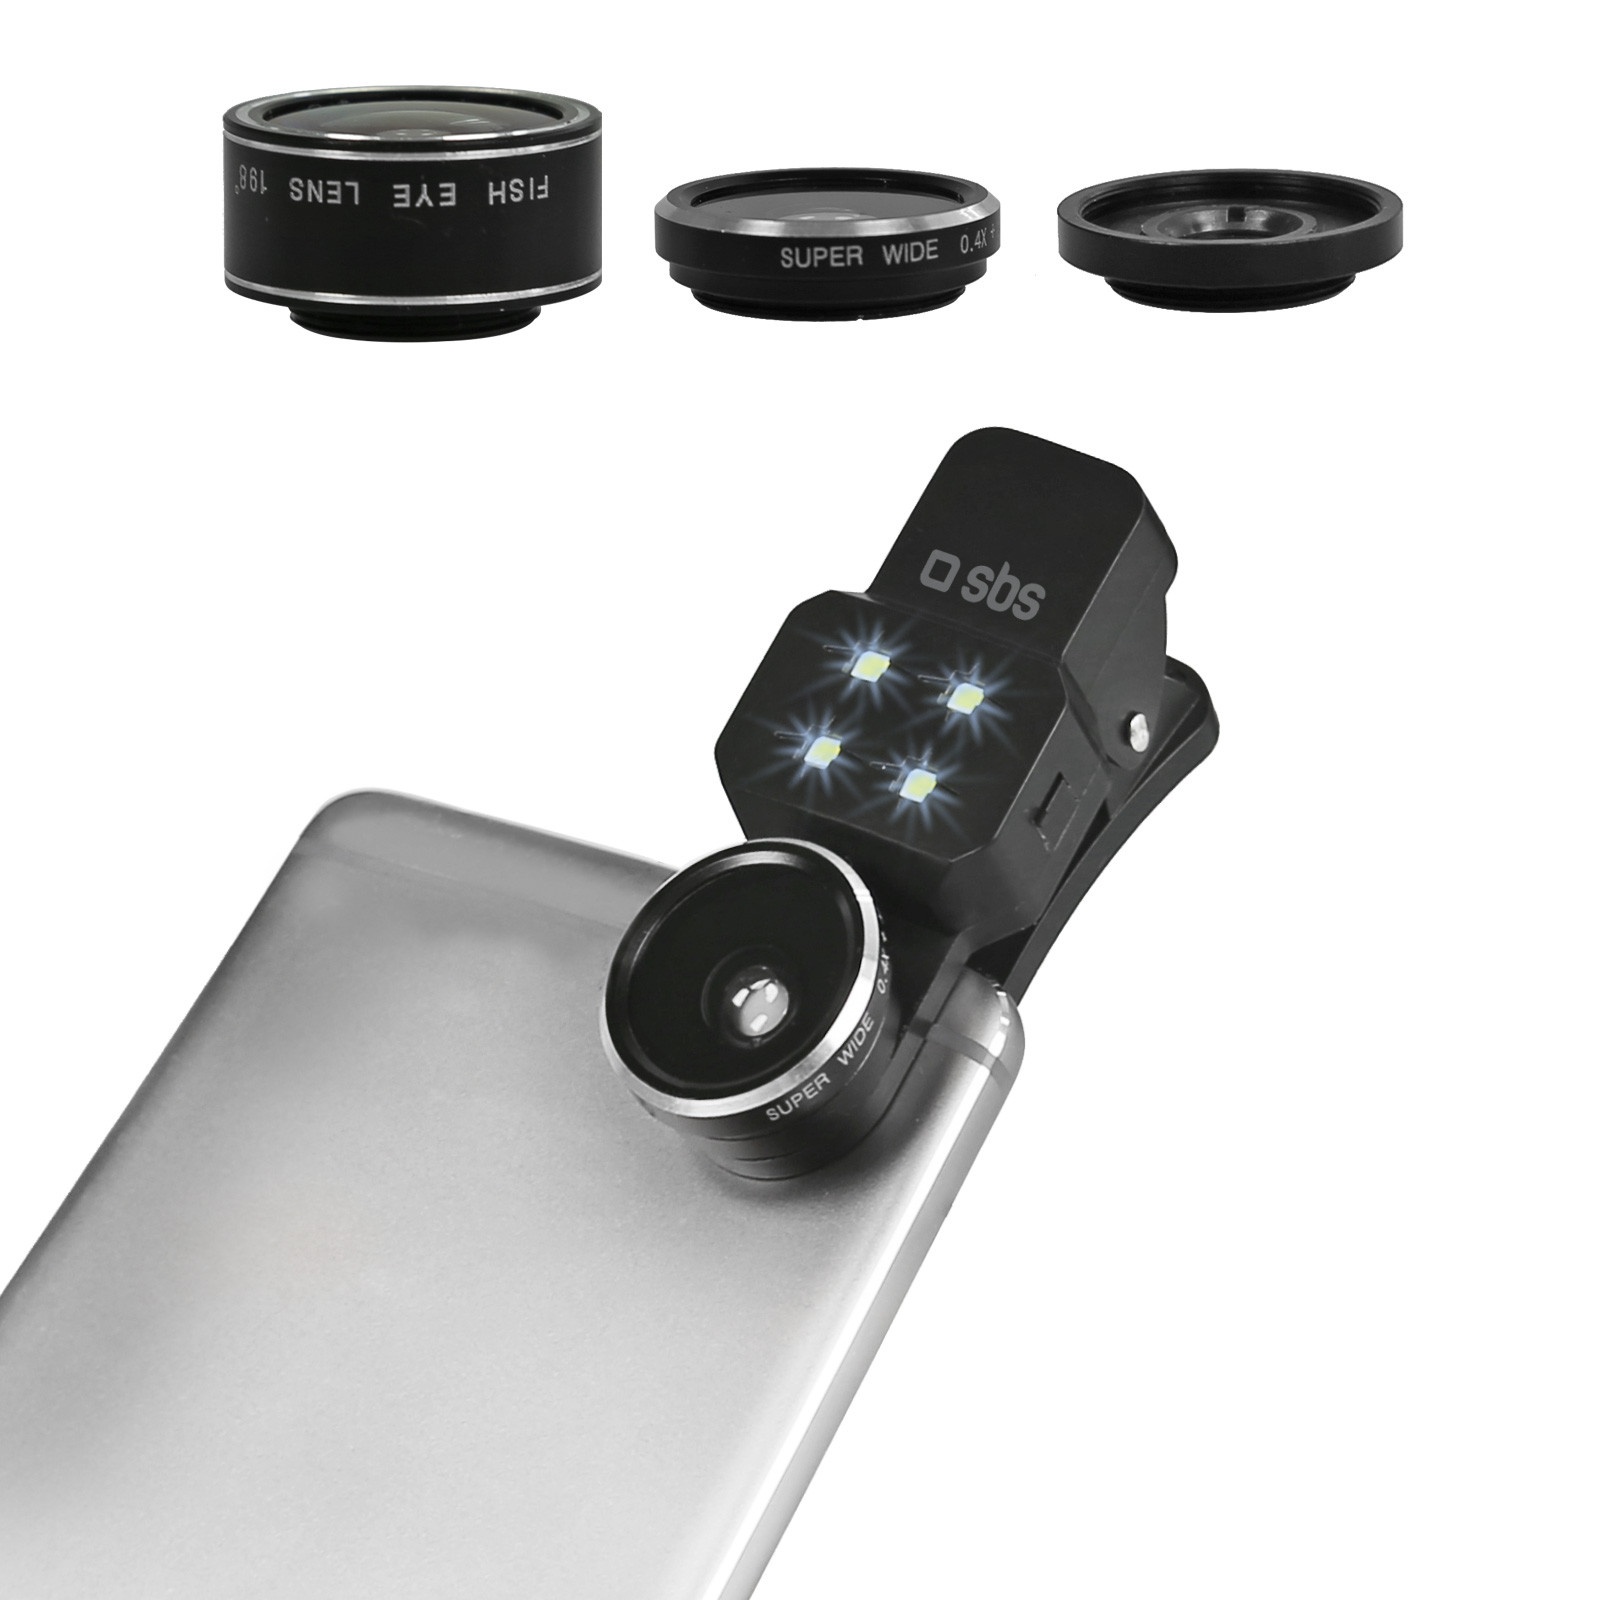 SBS Lens Kit 3 in 1 universal for Smartphone with single camera (Fish Eye, Macro, Wild Angle)